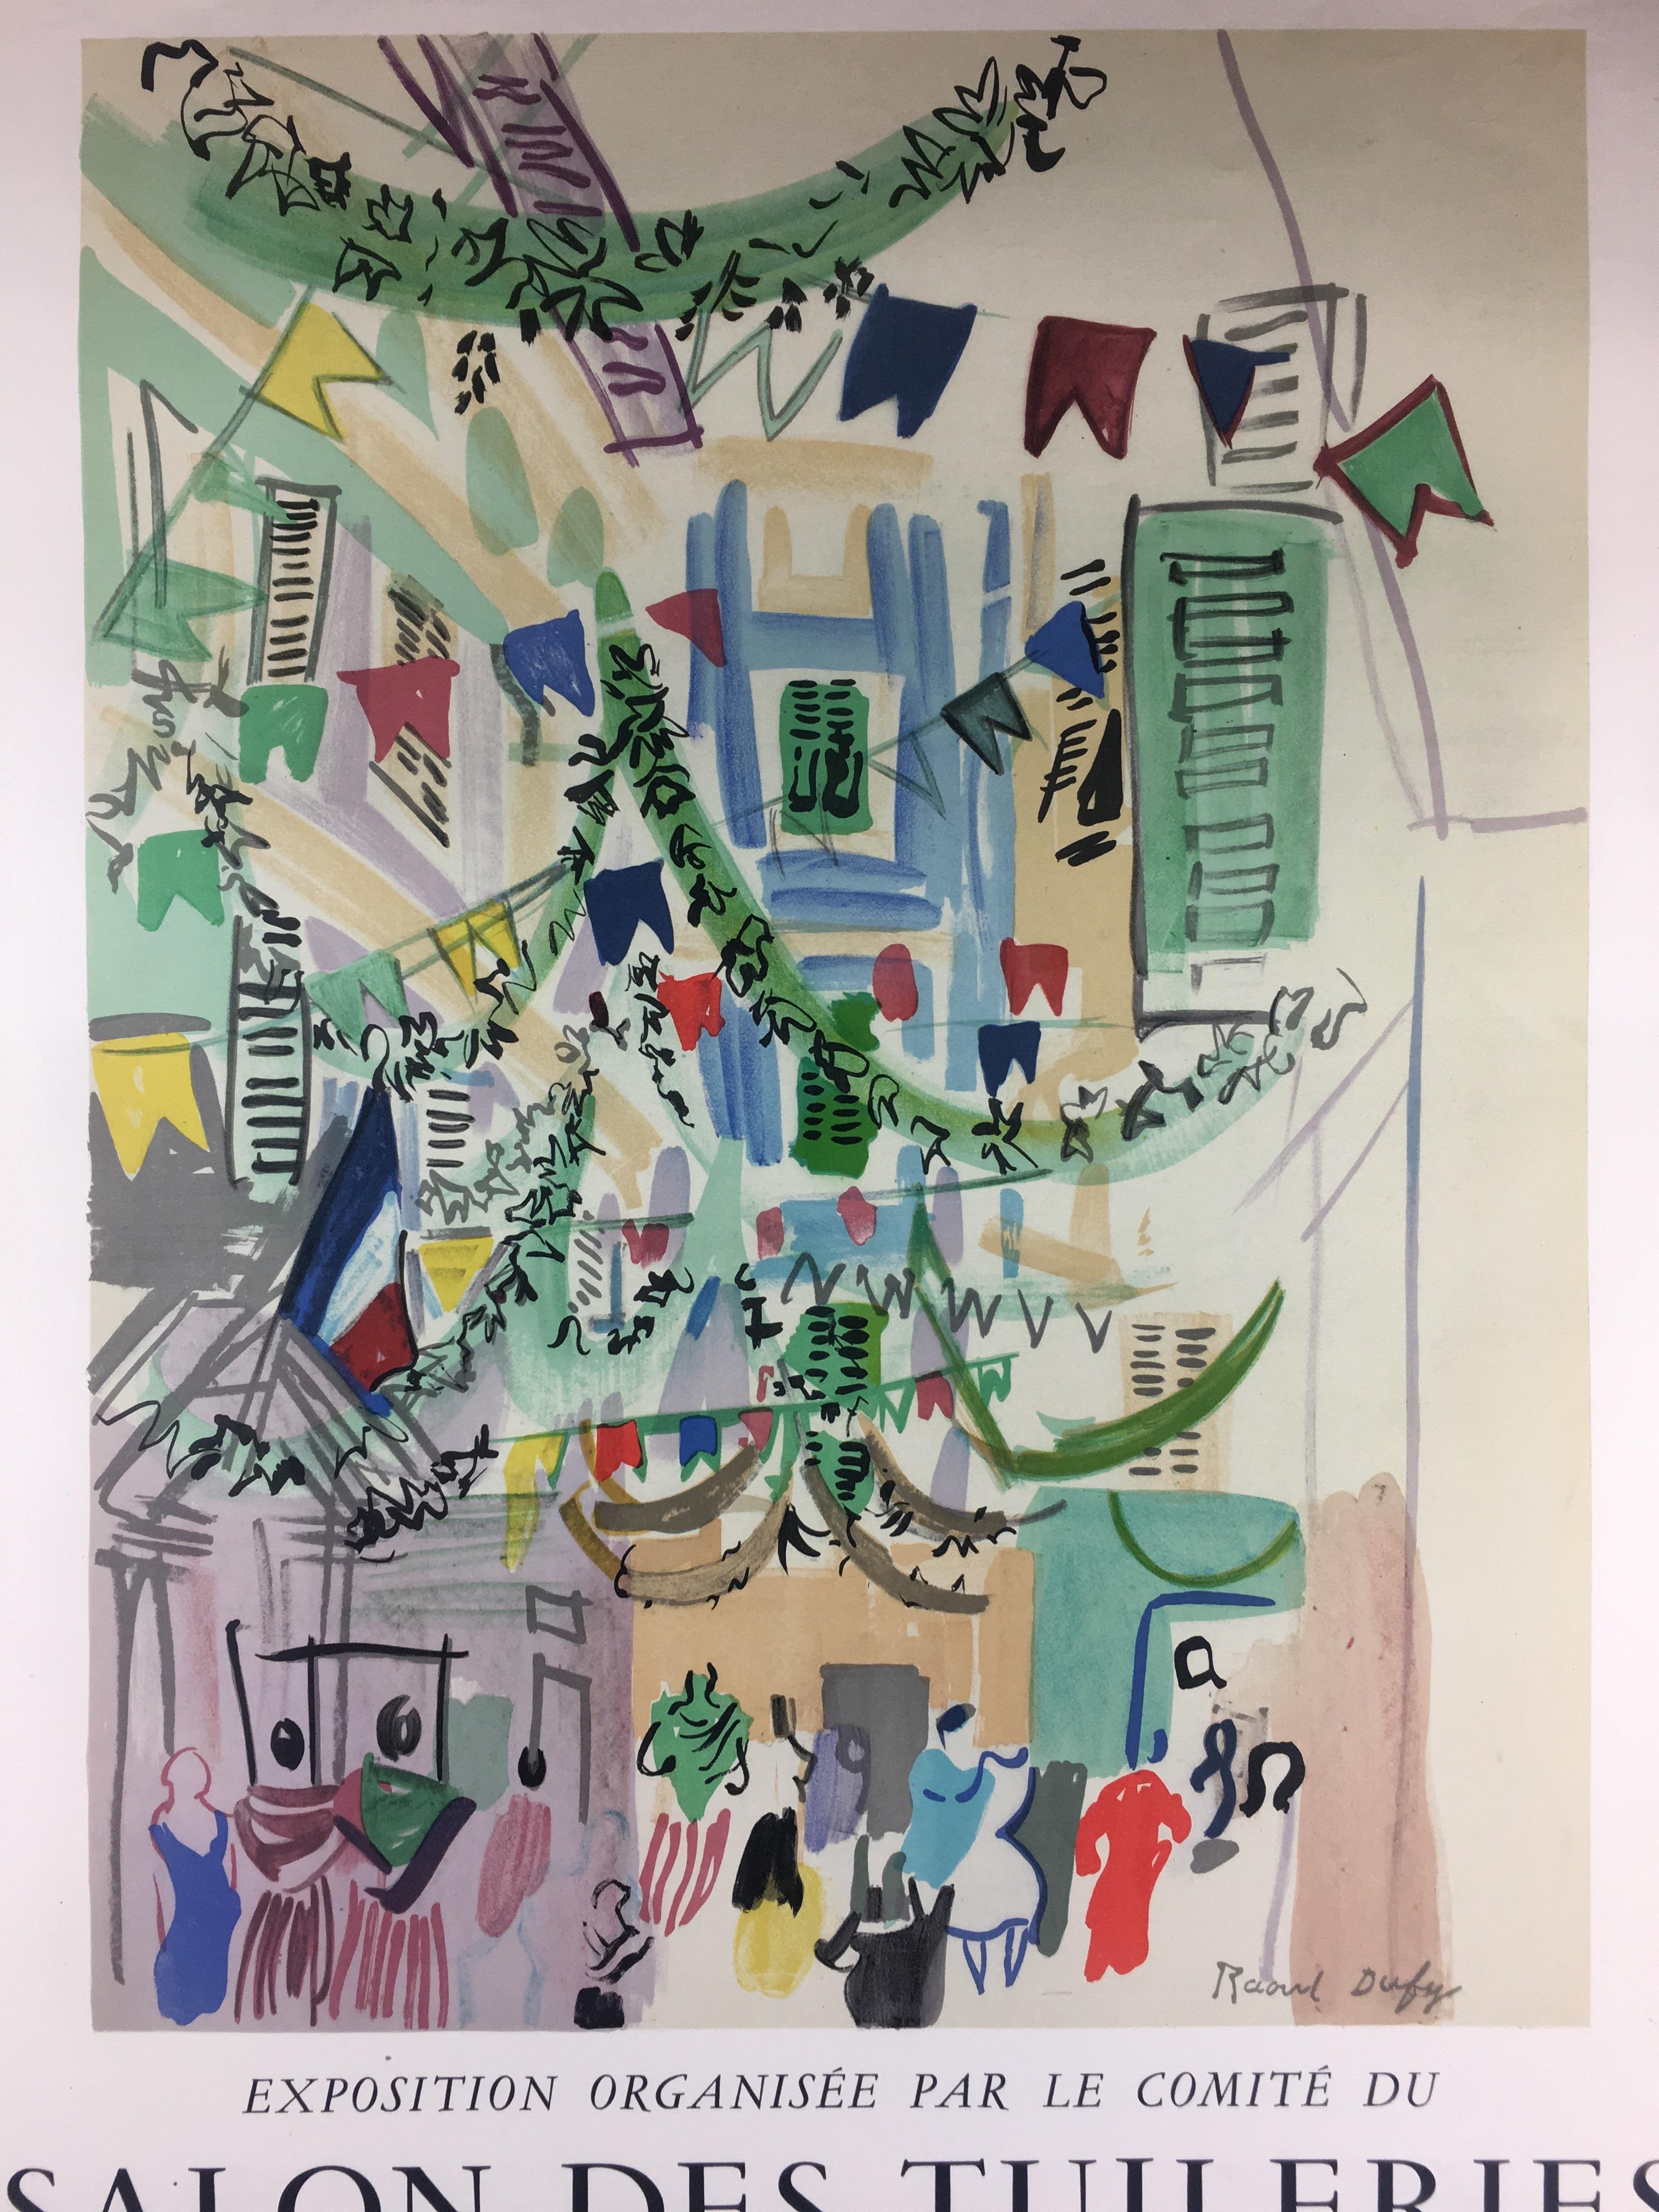 Original midcentury Raoul Dufy art poster from the 1950s printed by Mourlot, Paris, France. 

Raoul Dufy was a renowned artist that created excellent works of art in both contemporary and Mid-Century Modern styles. This is an original vintage